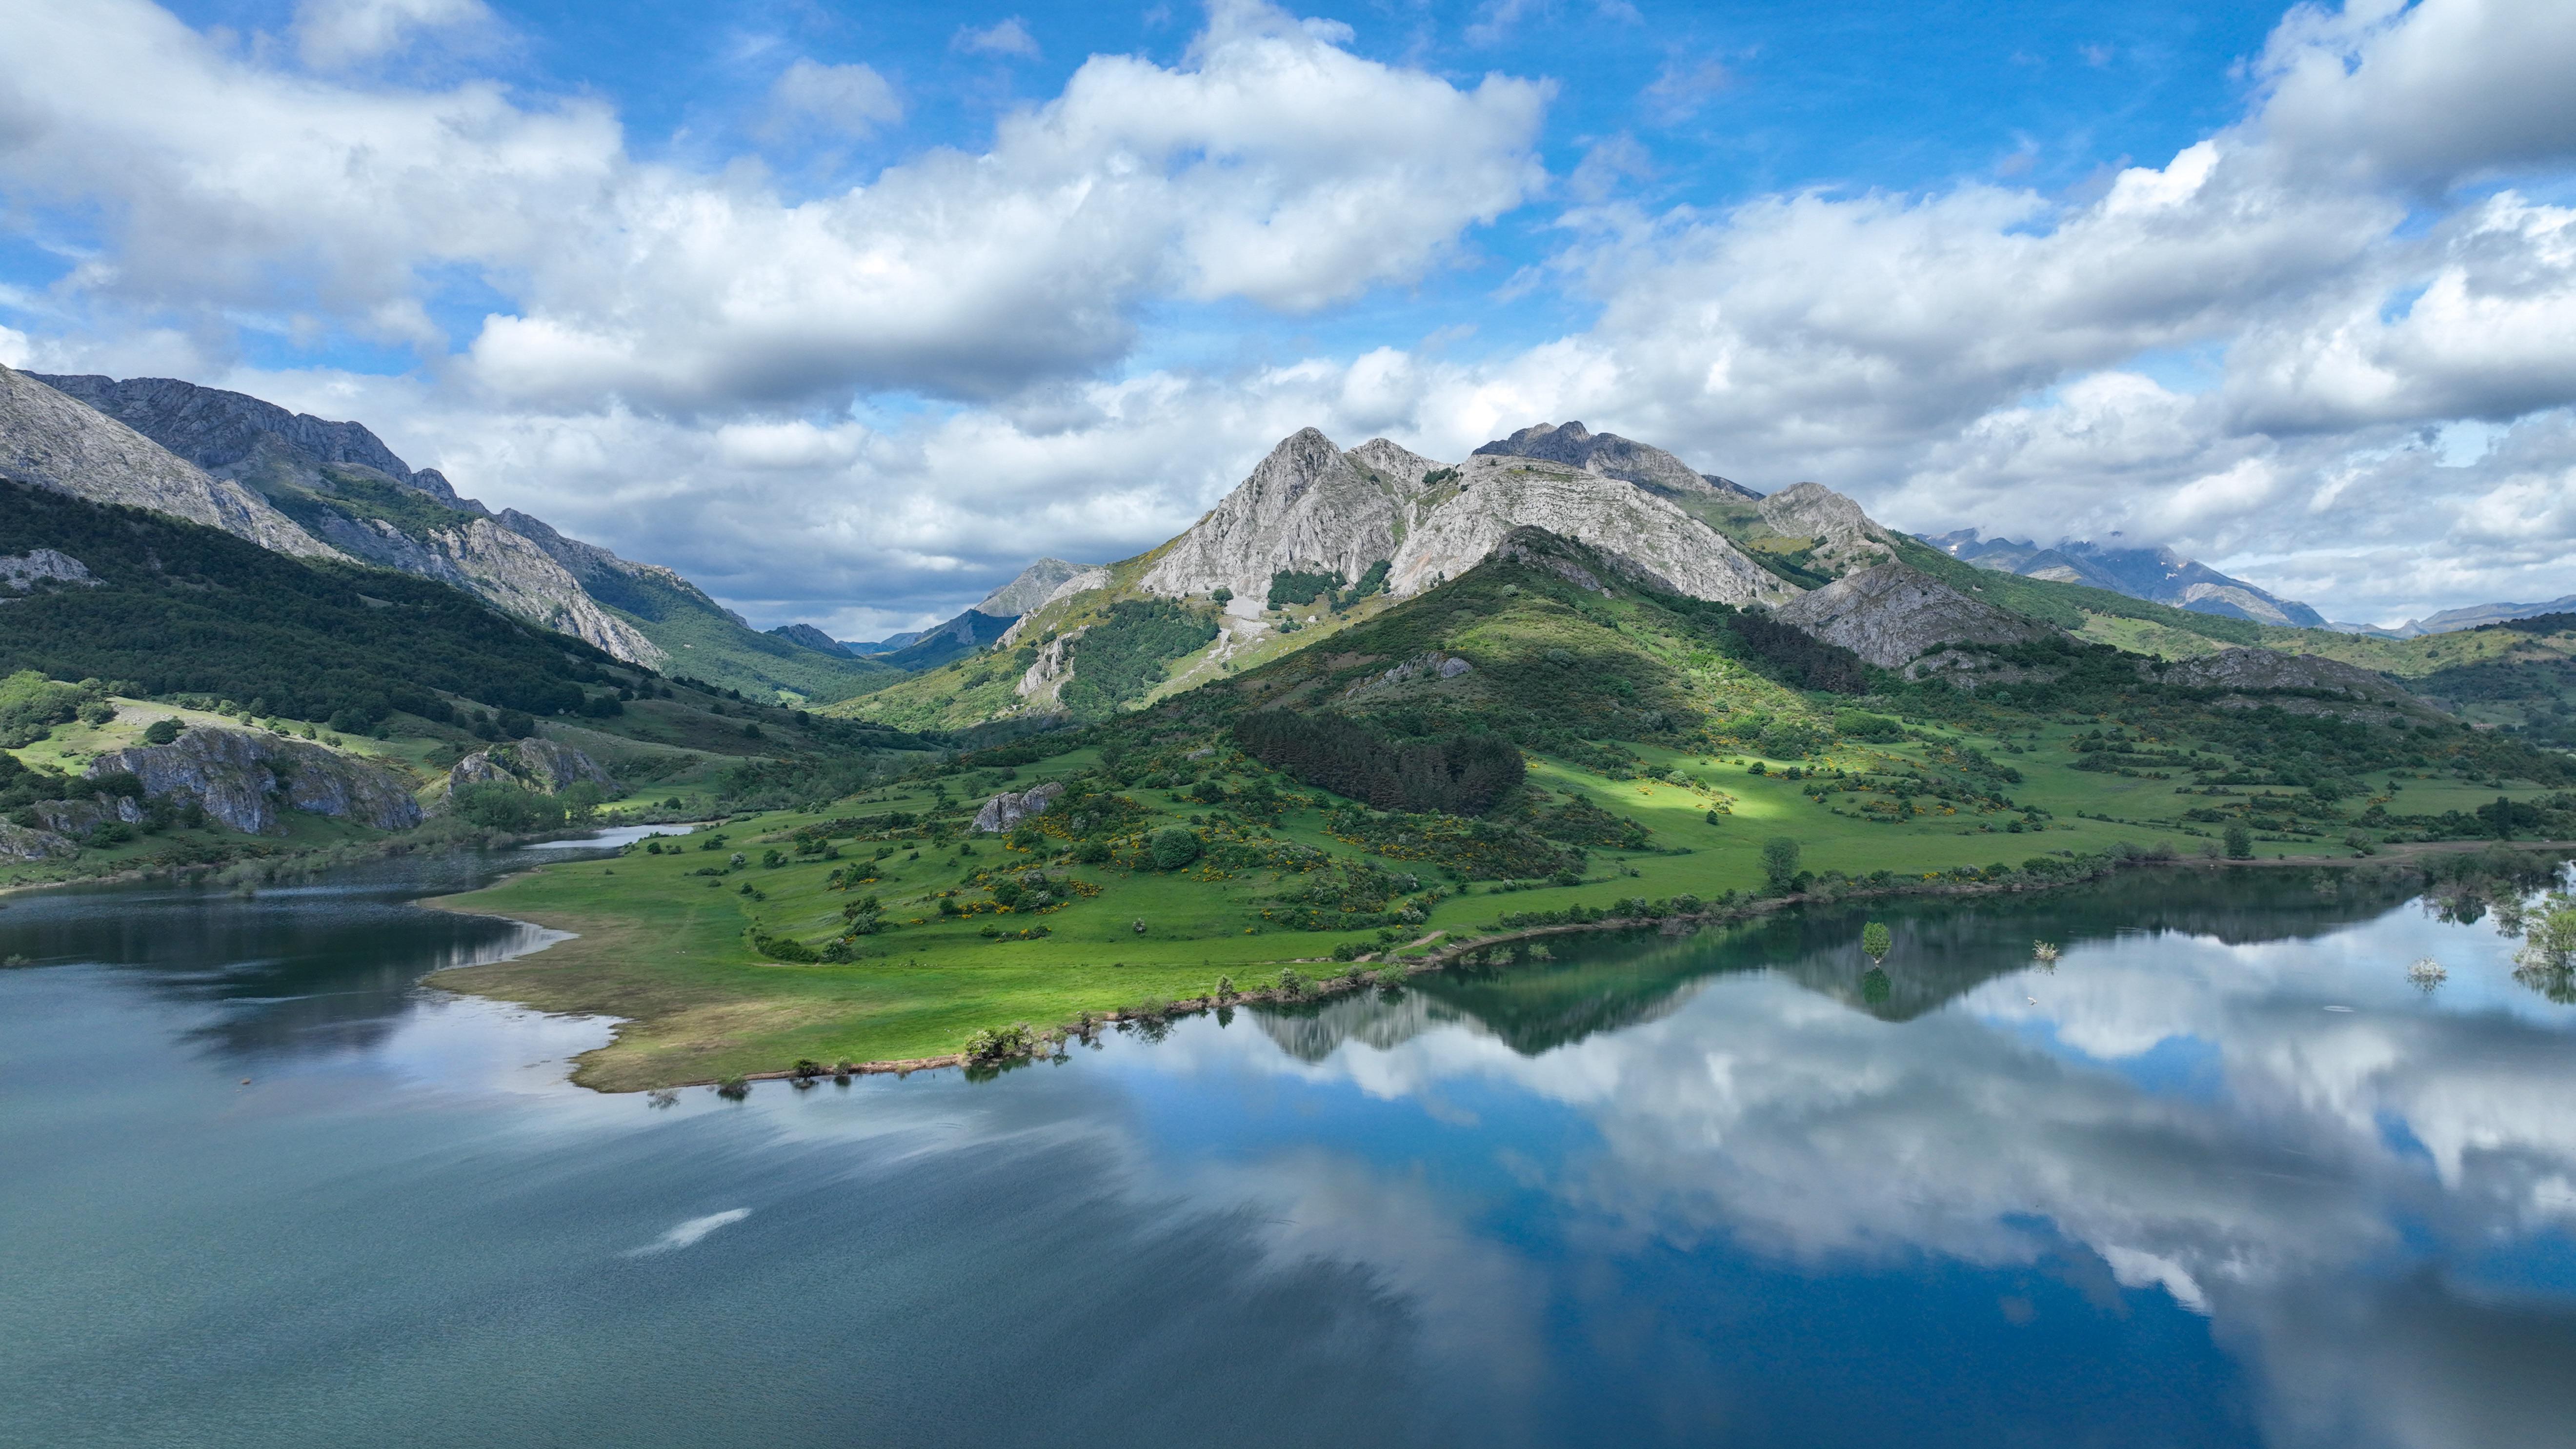 General 5280x2970 landscape nature lake clouds mountains water